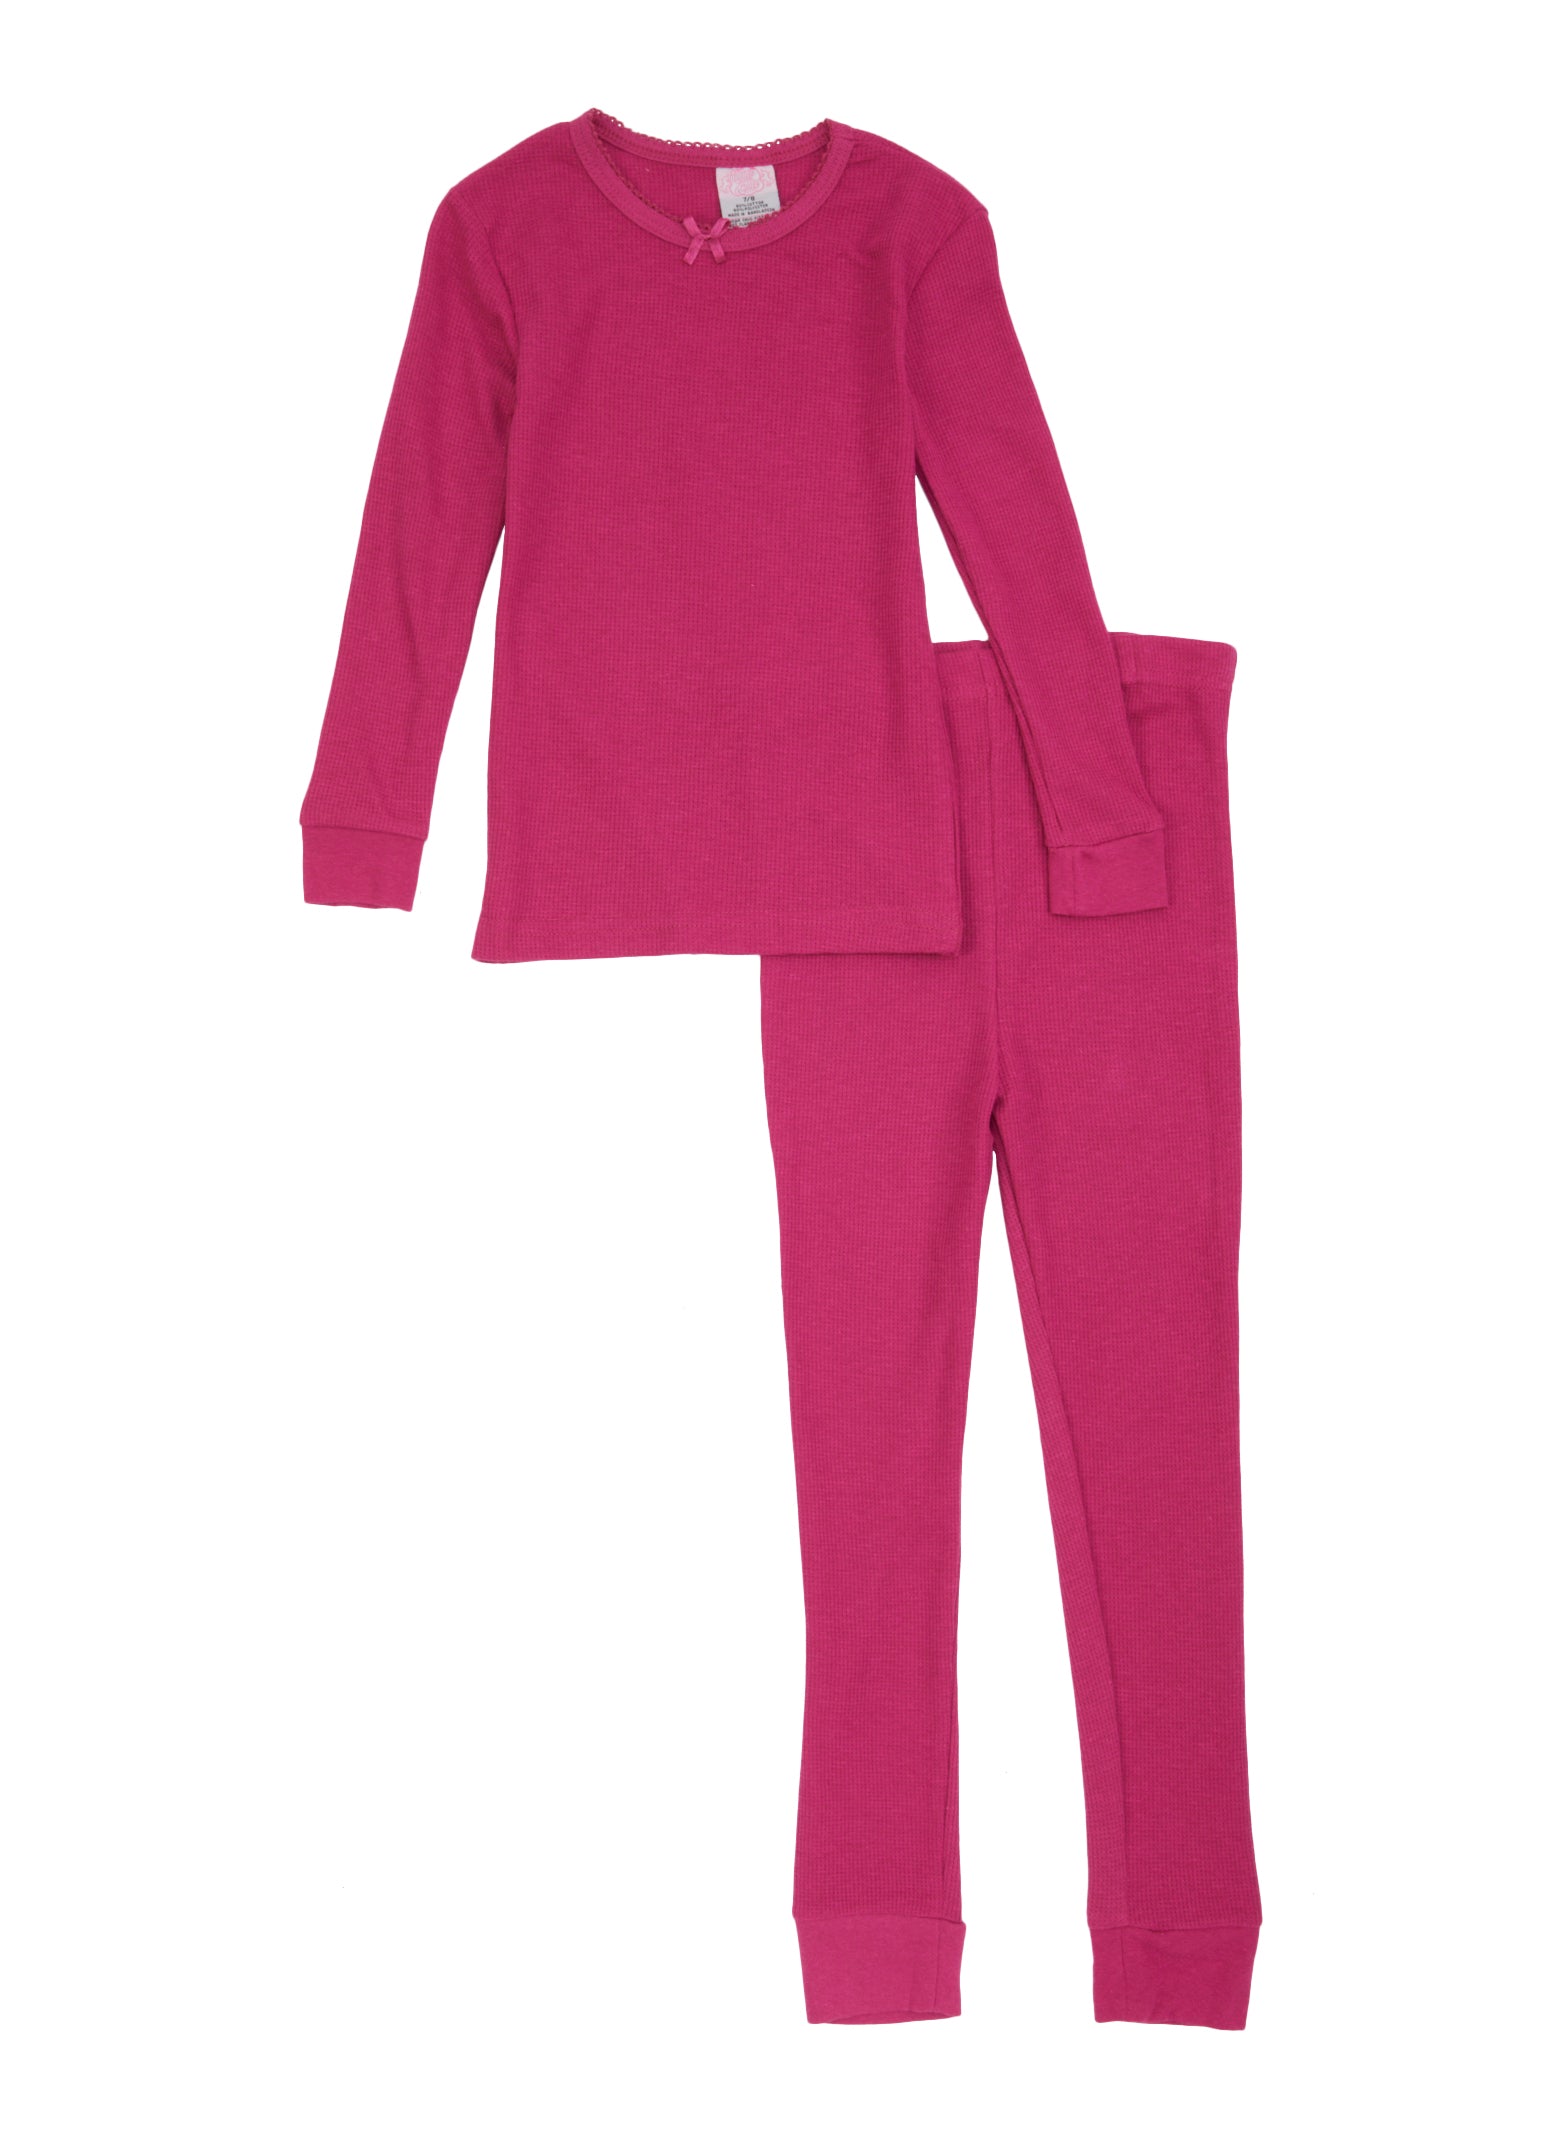 Girls Solid Thermal Top and Pants